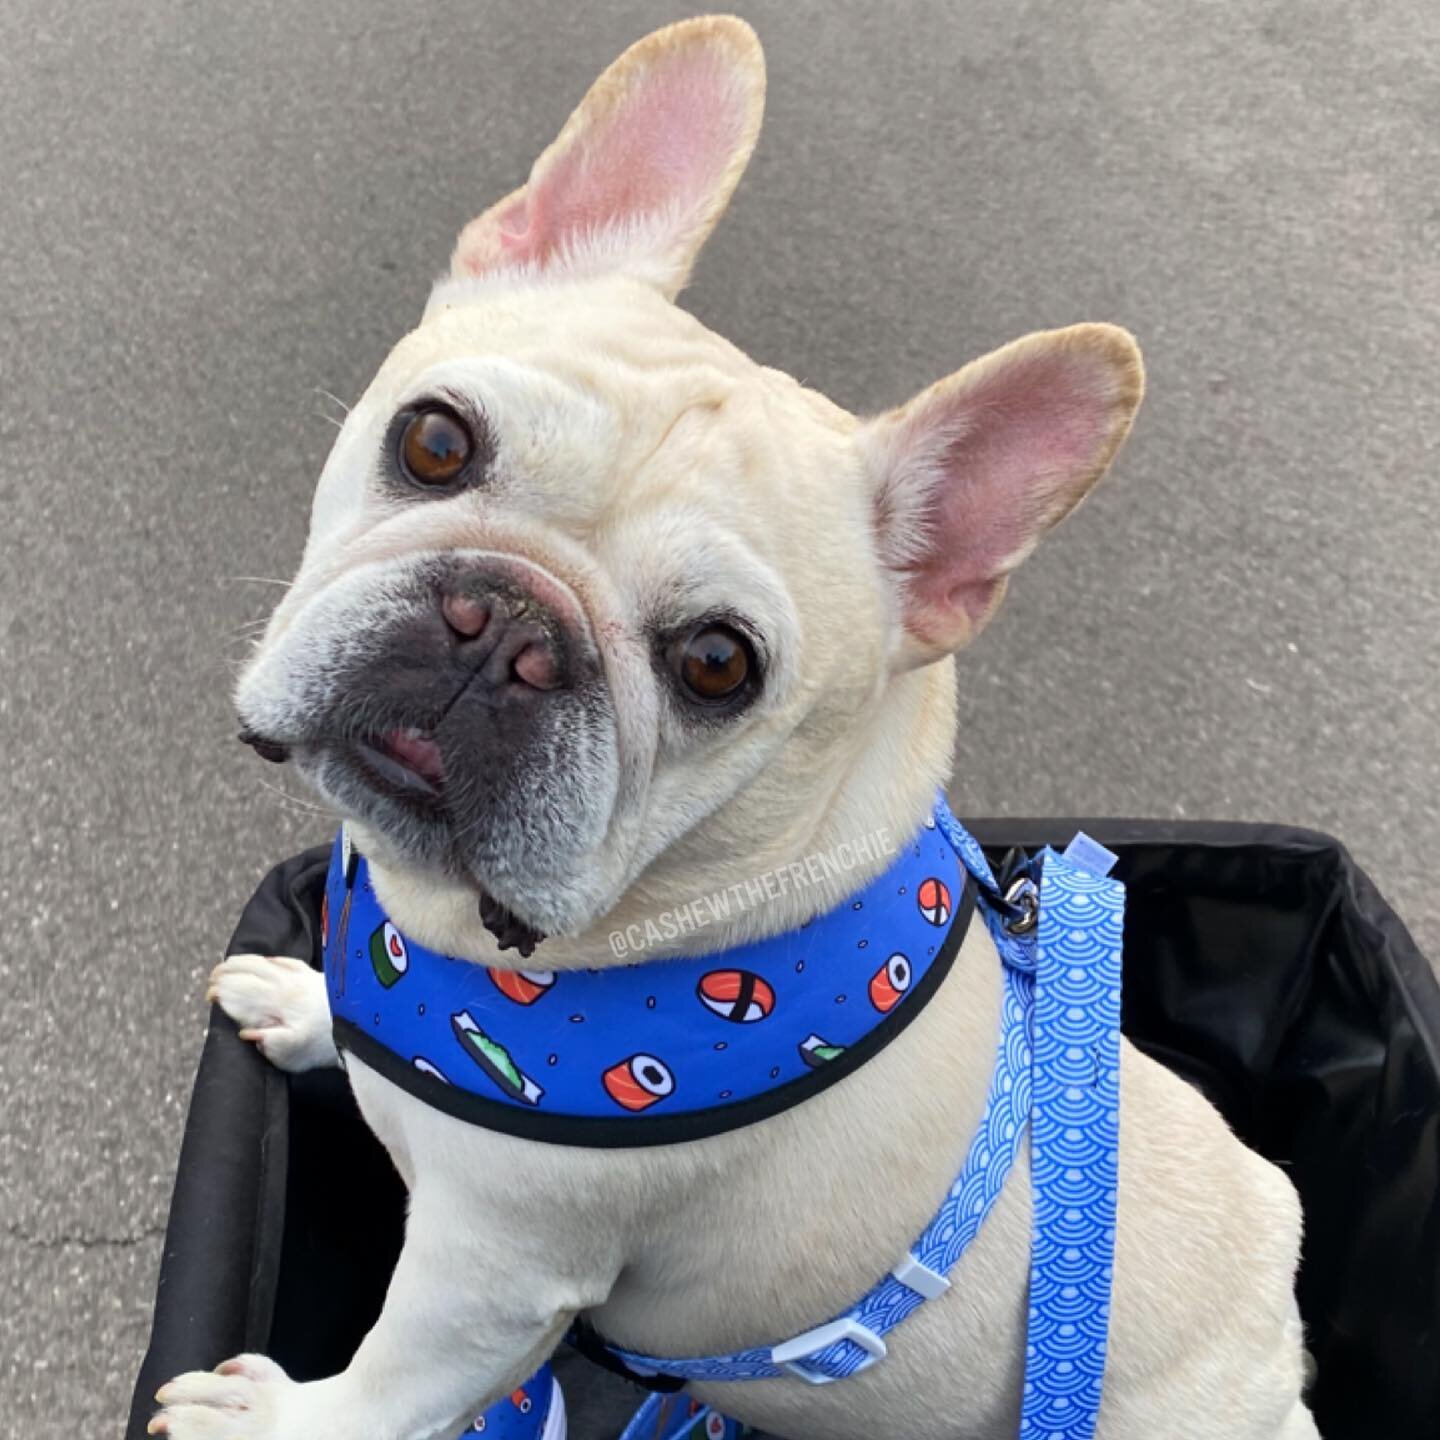 Sunday stroll w/ my squid lips peeking out. Great weather means we get to take &ldquo;the long loop&rdquo;, YEAH! The long loop is like the short loop, only longer... you know? 
&bull;
&bull;
&bull;
#instagood #instadog #instadaily #frenchiesofinstag